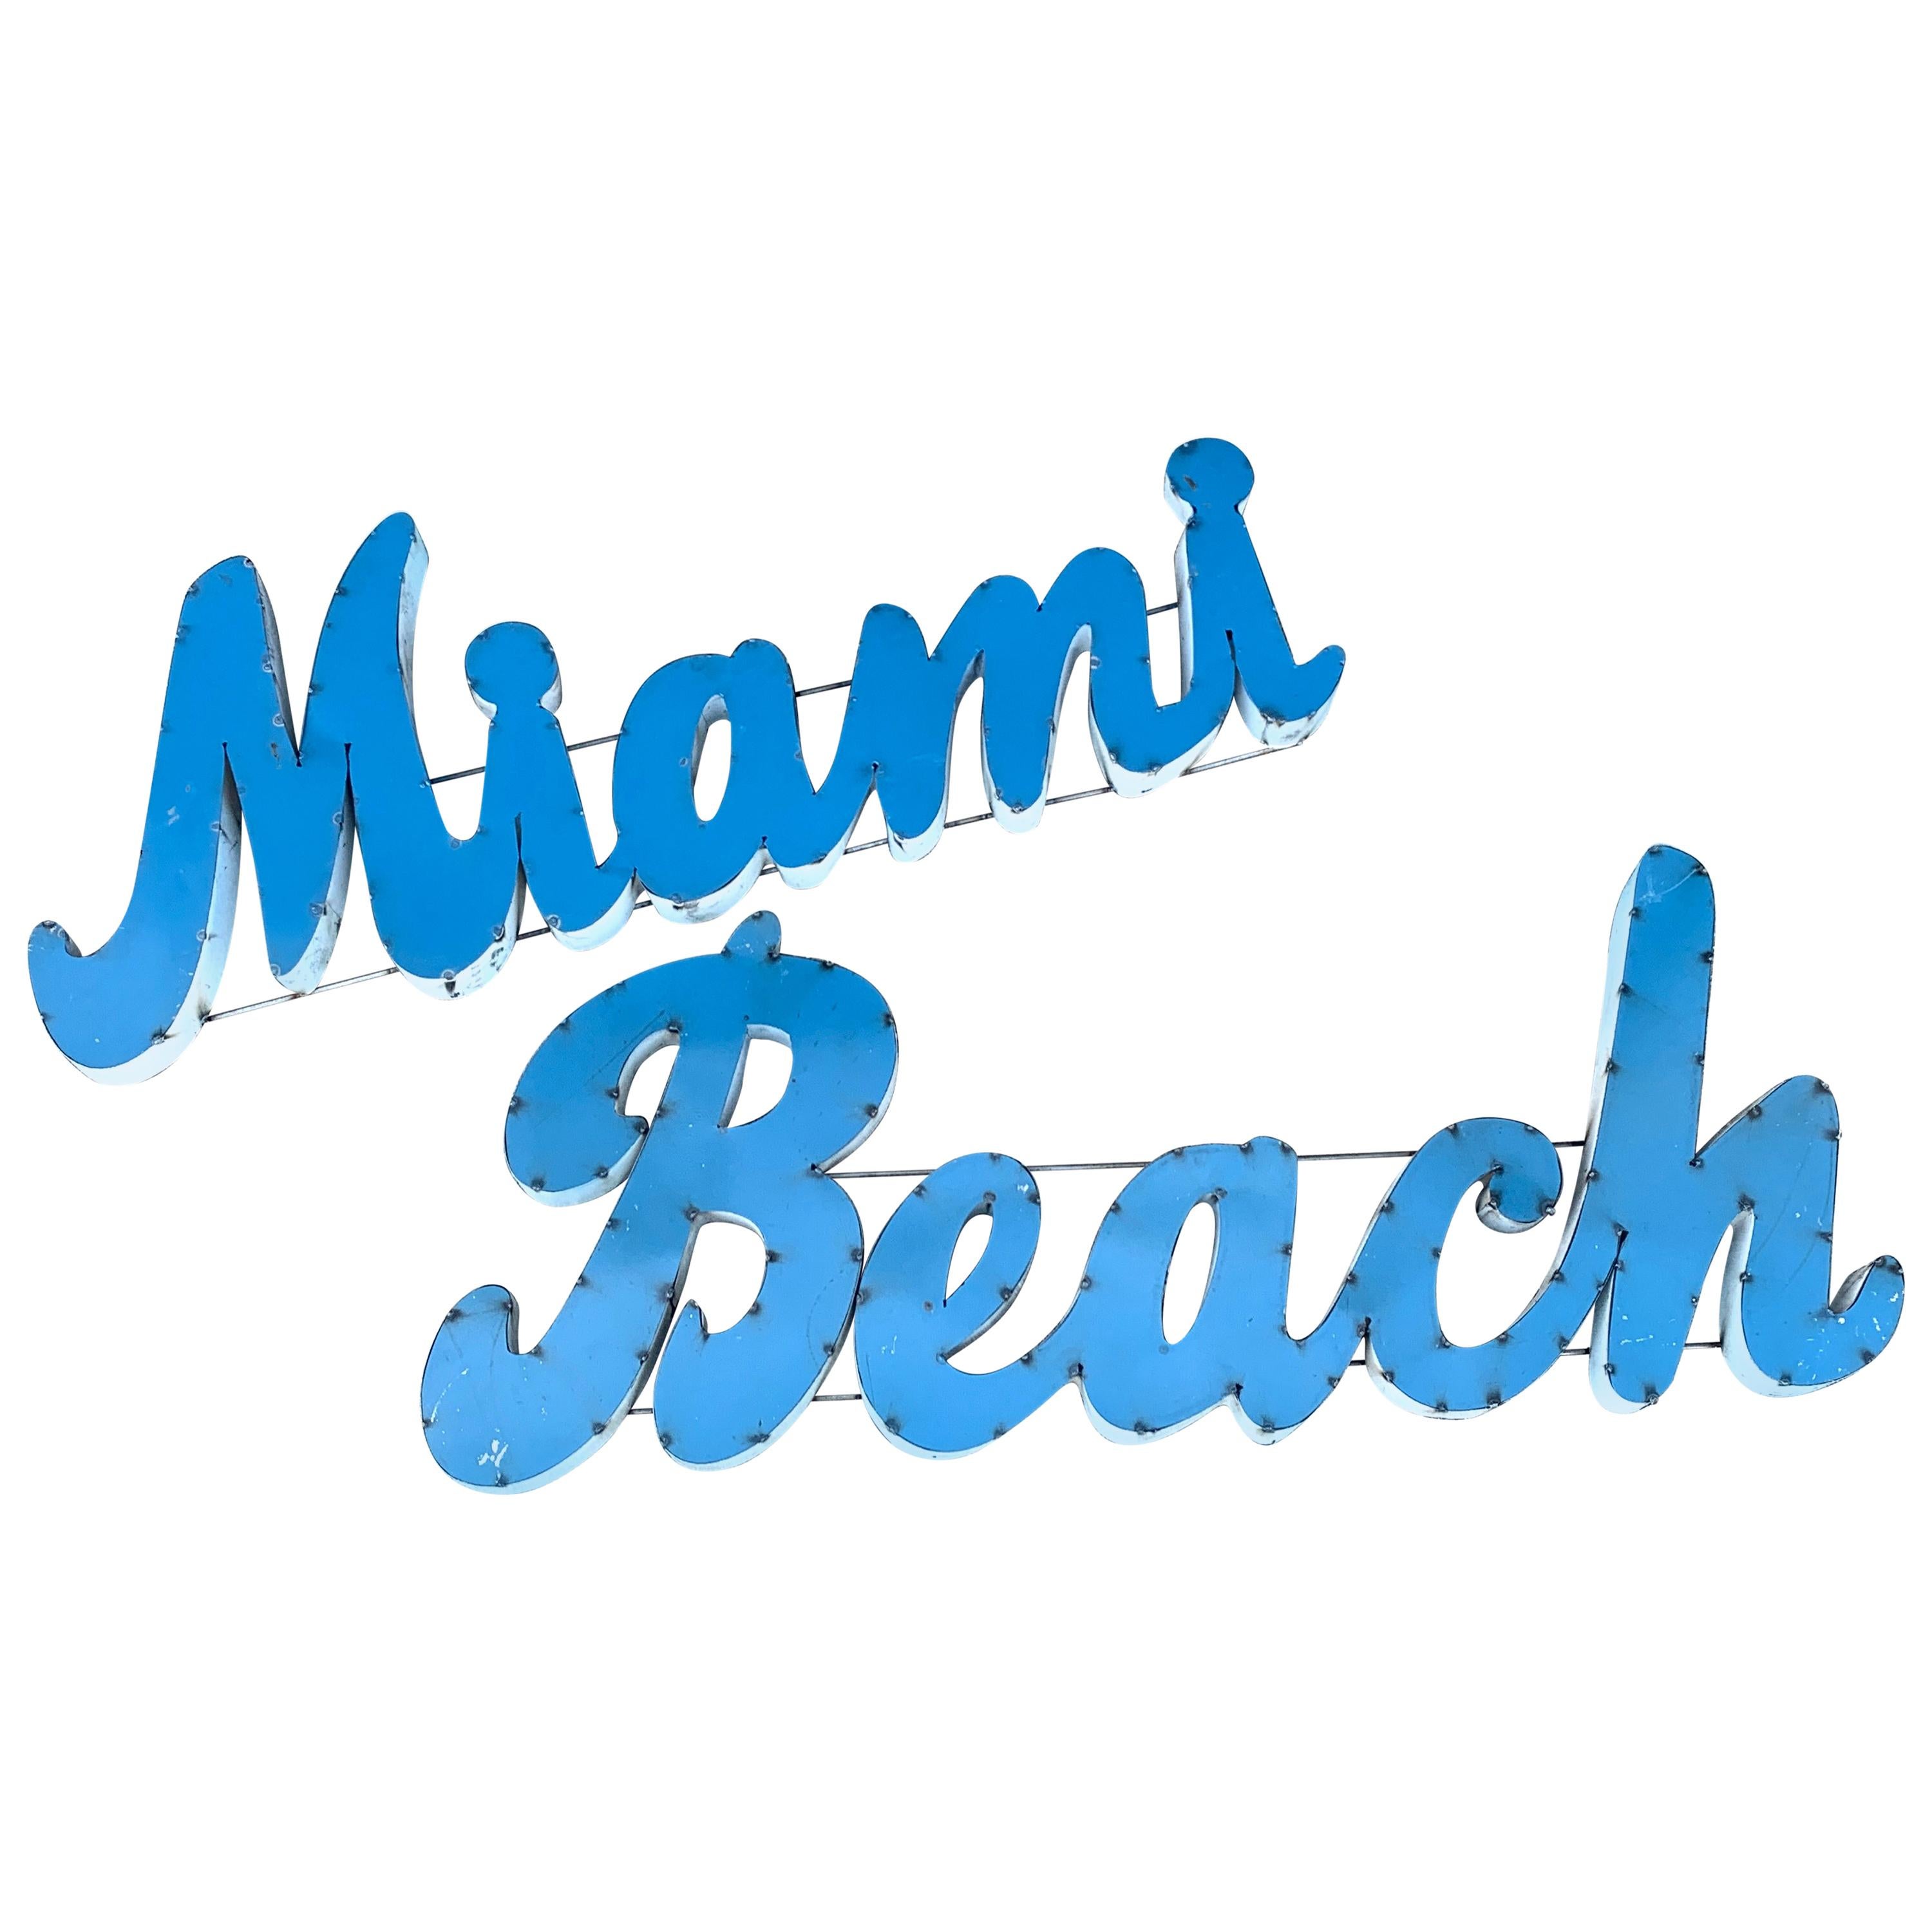 Vintage Style Miami USA Sign Metal American Wall Plaque I Was There Sign